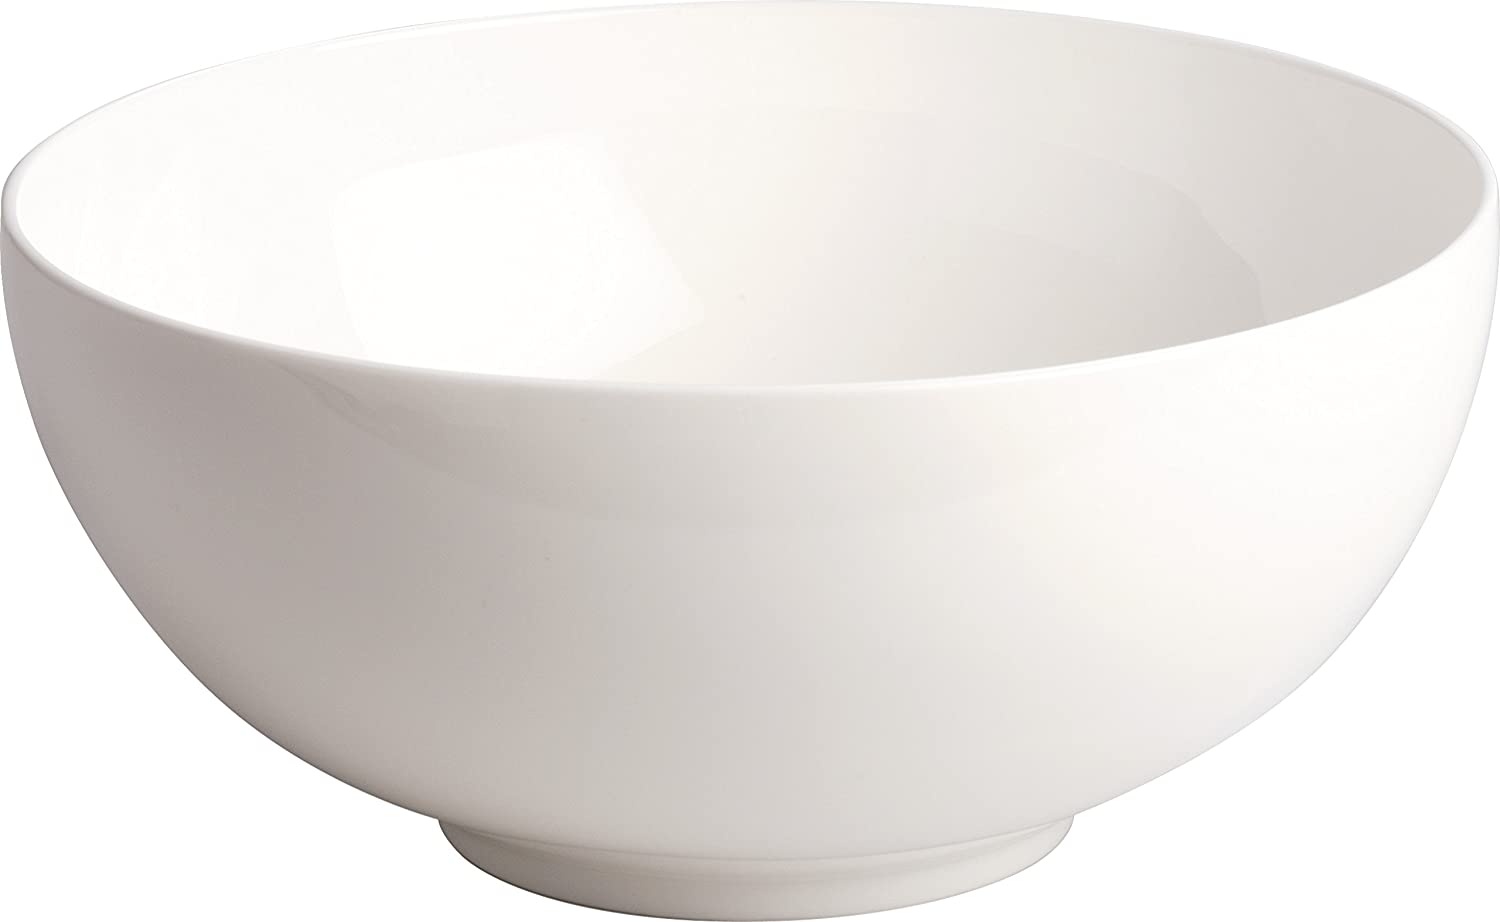 AGV29/3825 All-Time Salad serving bowl in bone china